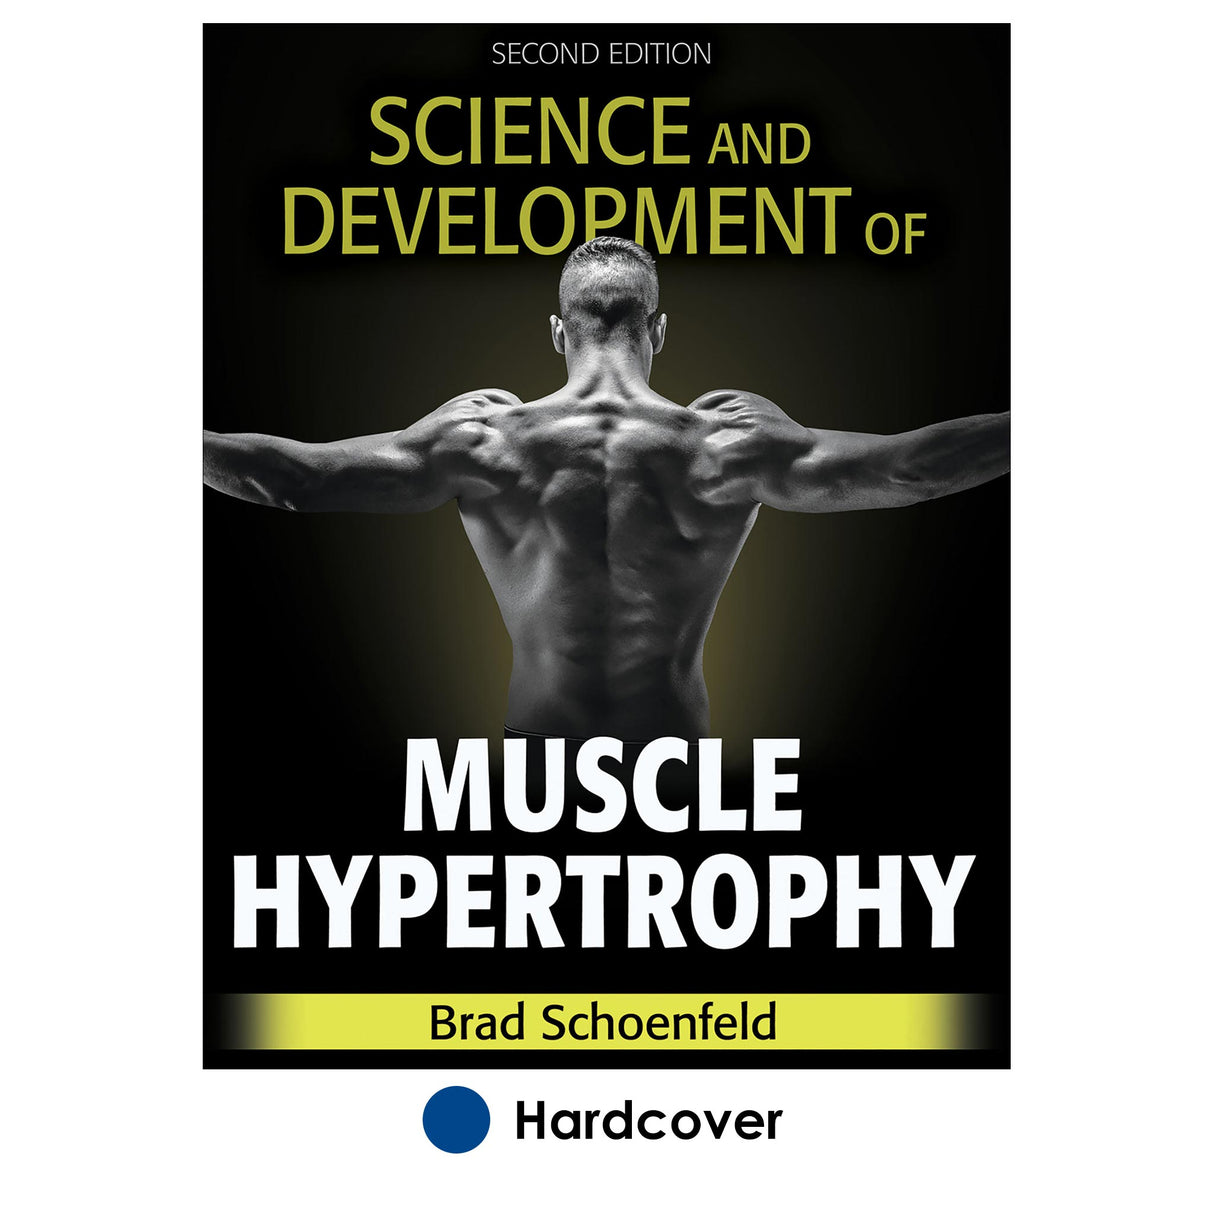 Science and Development of Muscle Hypertrophy-2nd Edition